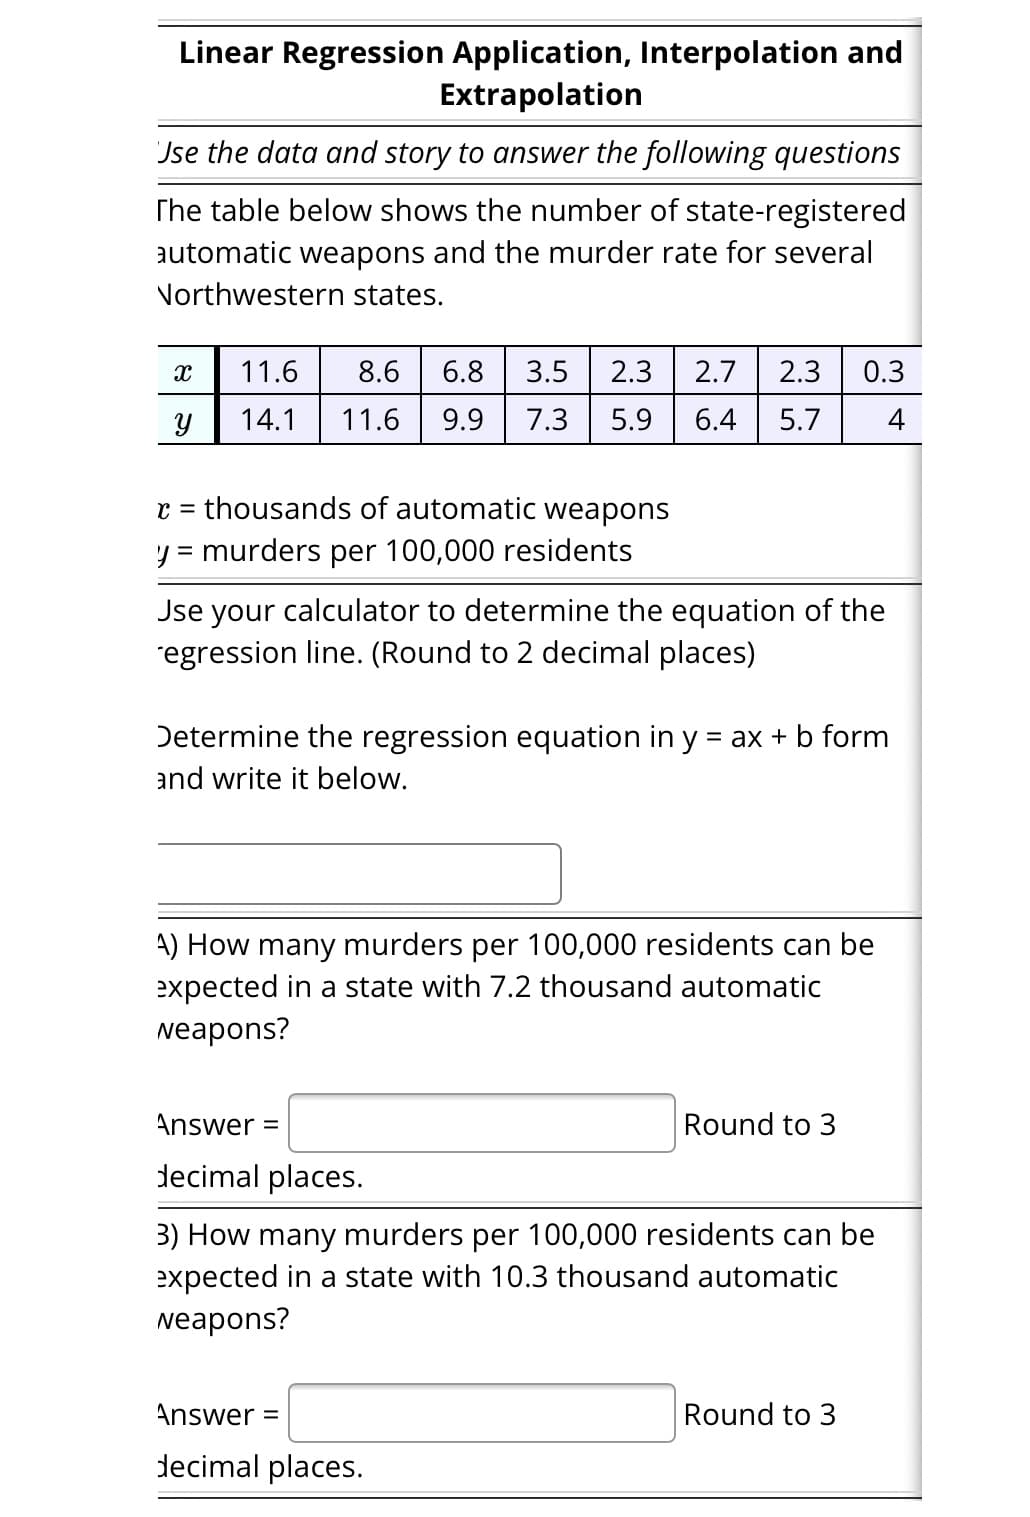 Linear Regression Application, Interpolation and
Extrapolation
Jse the data and story to answer the following questions
The table below shows the number of state-registered
automatic weapons and the murder rate for several
Northwestern states.
X
Y
11.6
8.6 6.8 3.5 2.3 2.7 2.3 0.3
14.1 11.6 9.9 7.3 5.9 6.4 5.7 4
C
thousands of automatic weapons
y = murders per 100,000 residents
Jse your calculator to determine the equation of the
´egression line. (Round to 2 decimal places)
Determine the regression equation in y = ax + b form
and write it below.
A) How many murders per 100,000 residents can be
expected in a state with 7.2 thousand automatic
weapons?
Answer =
decimal places.
Round to 3
3) How many murders per 100,000 residents can be
expected in a state with 10.3 thousand automatic
weapons?
Answer =
decimal places.
Round to 3